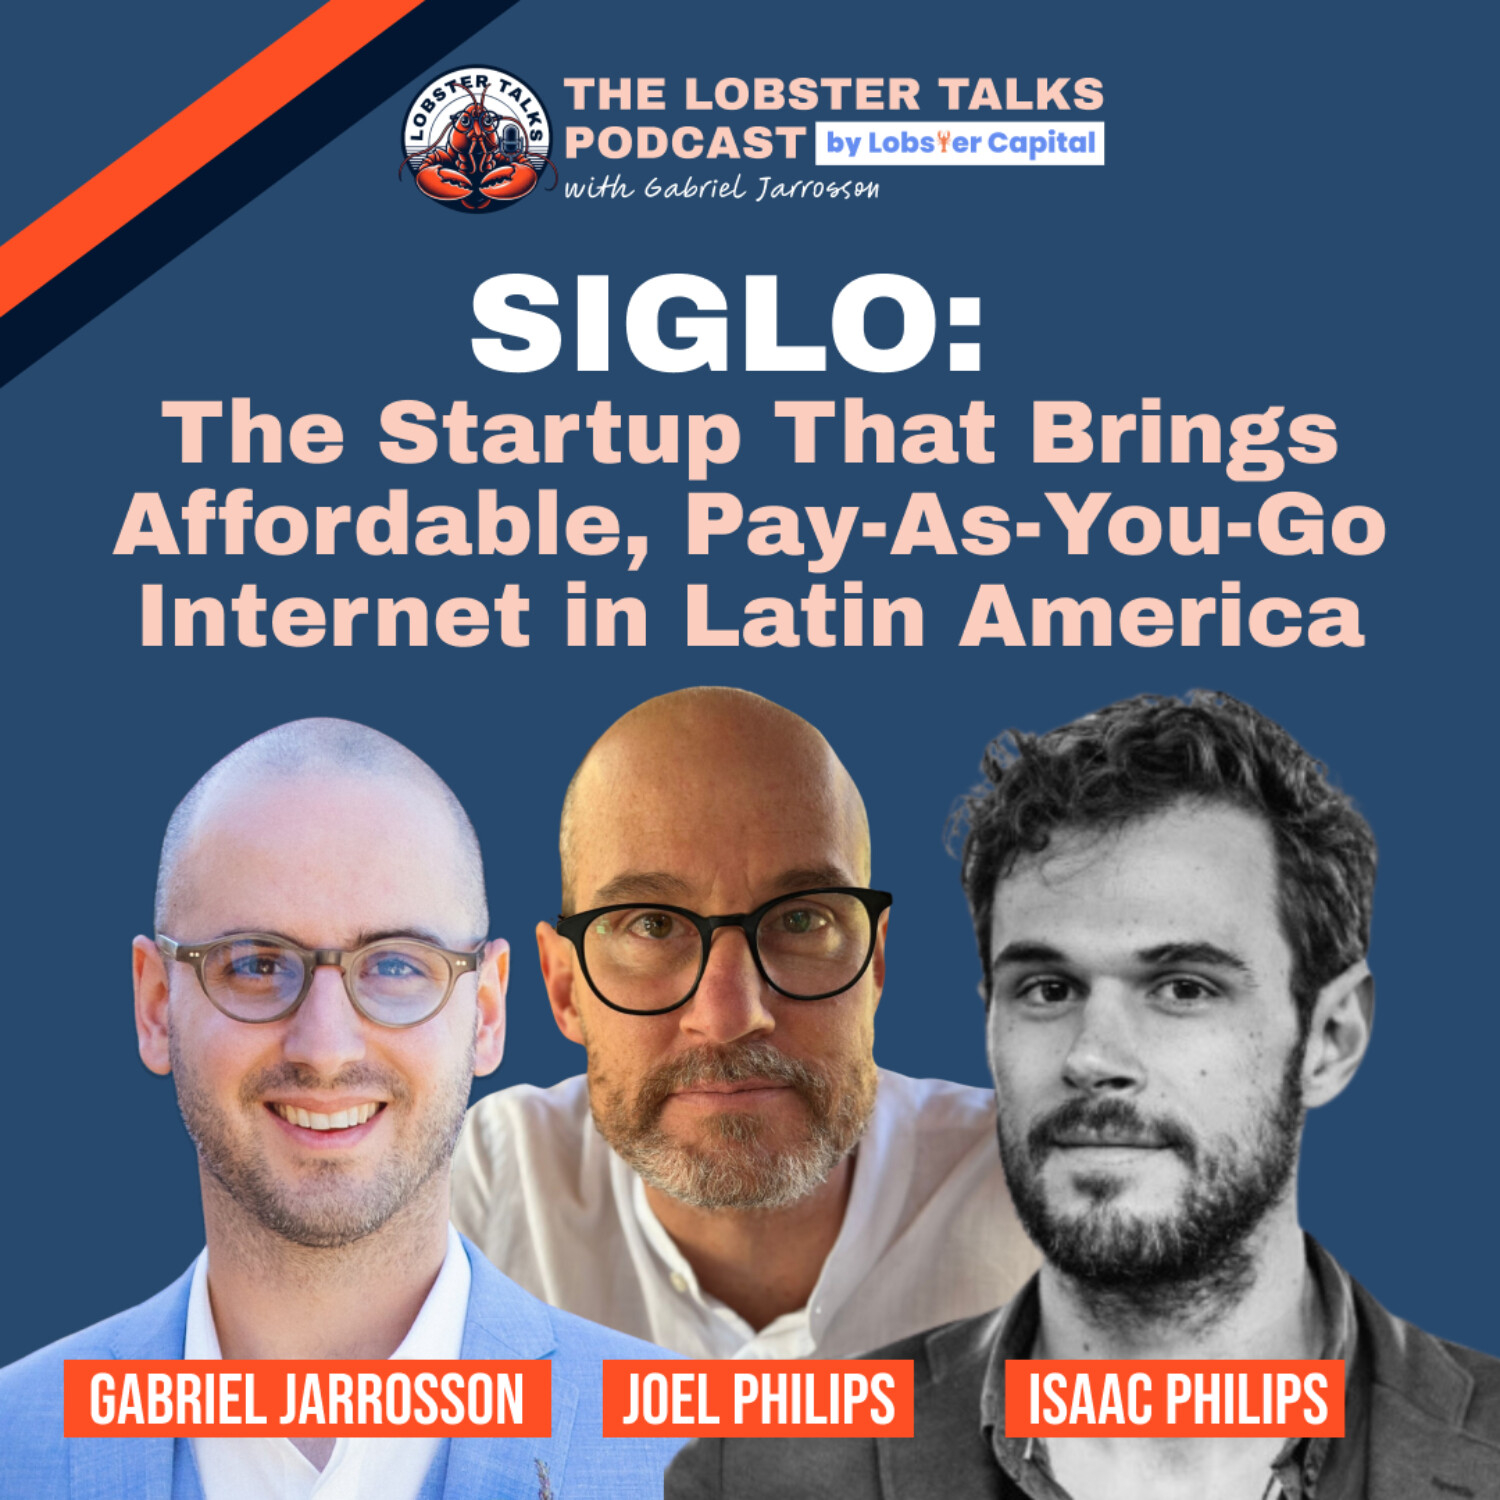 Siglo: The Startup That Brings Affordable, Pay-As-You-Go Internet for Latin America | Episode 3